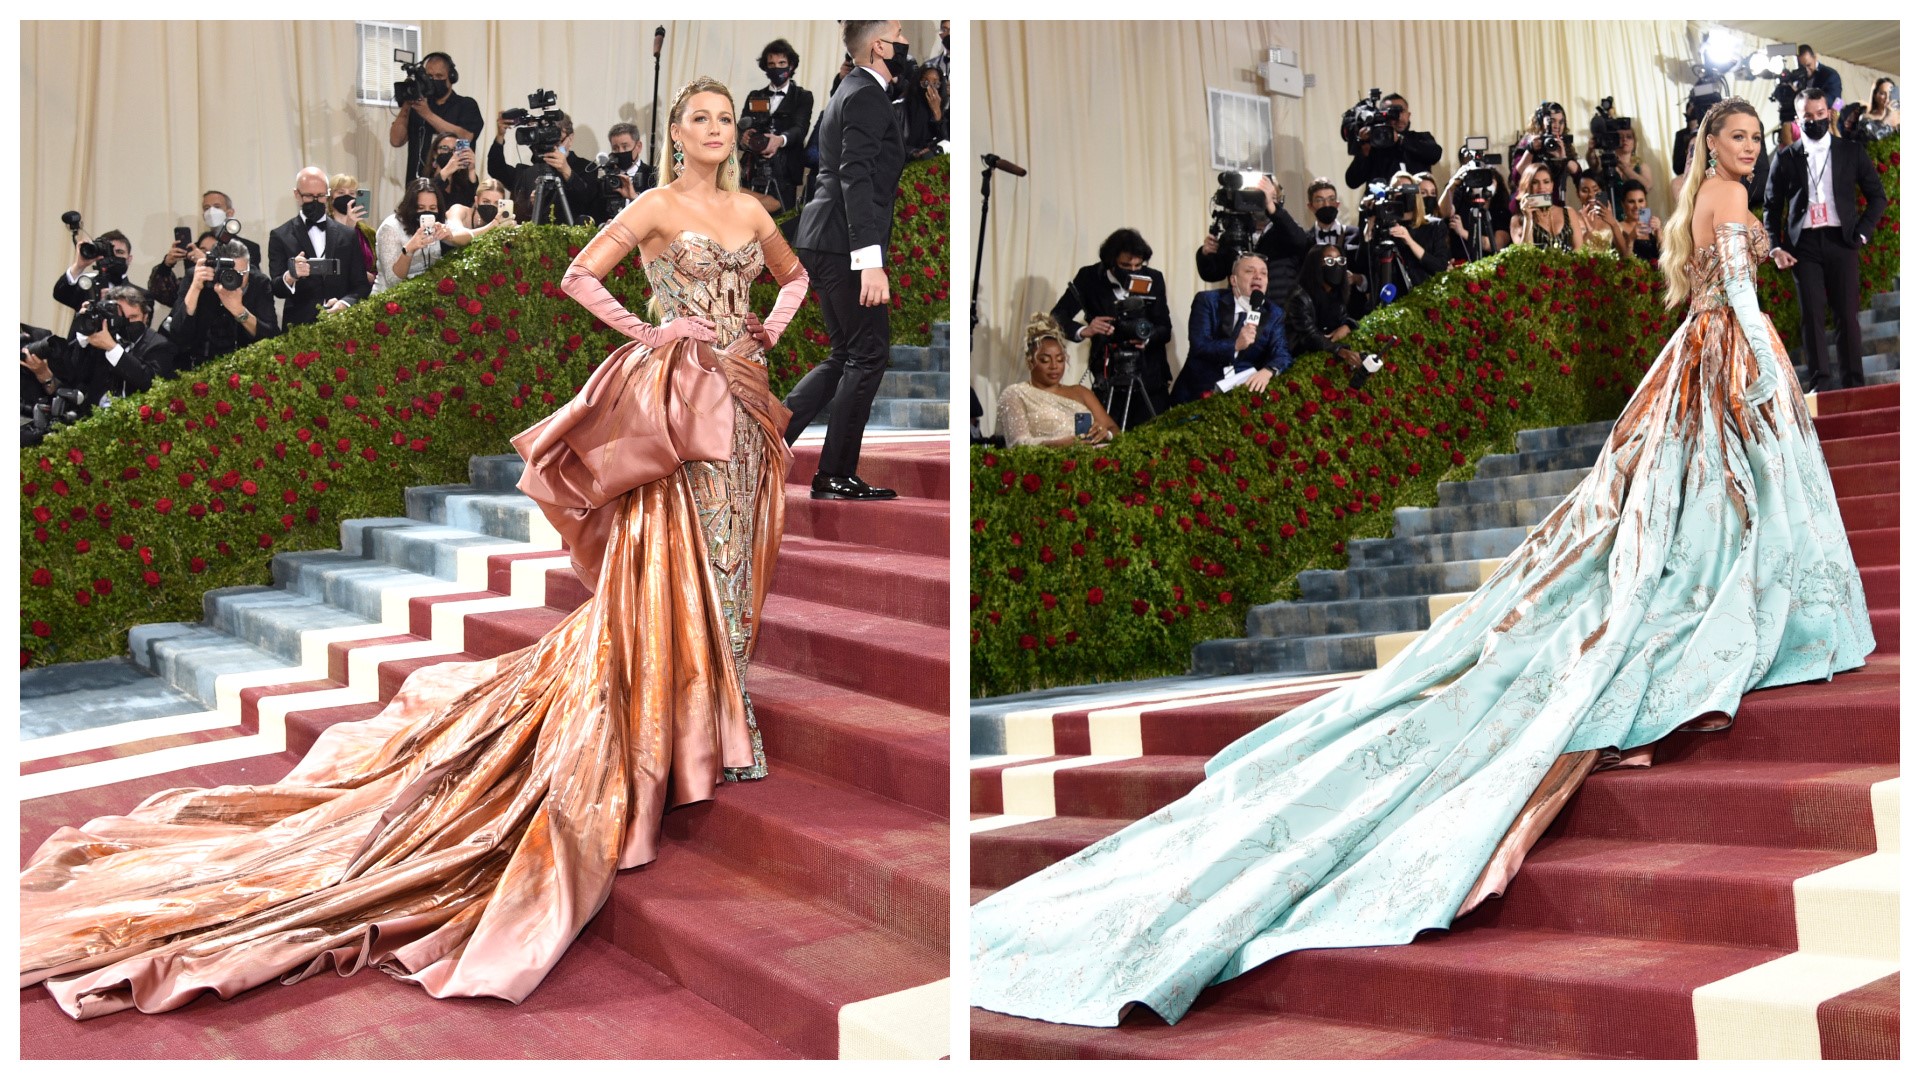 Blake Lively turned heads as she arrived to the 2022 Met Gala in one dress and transitioned into another, right on the famous staircase leading into the ball.